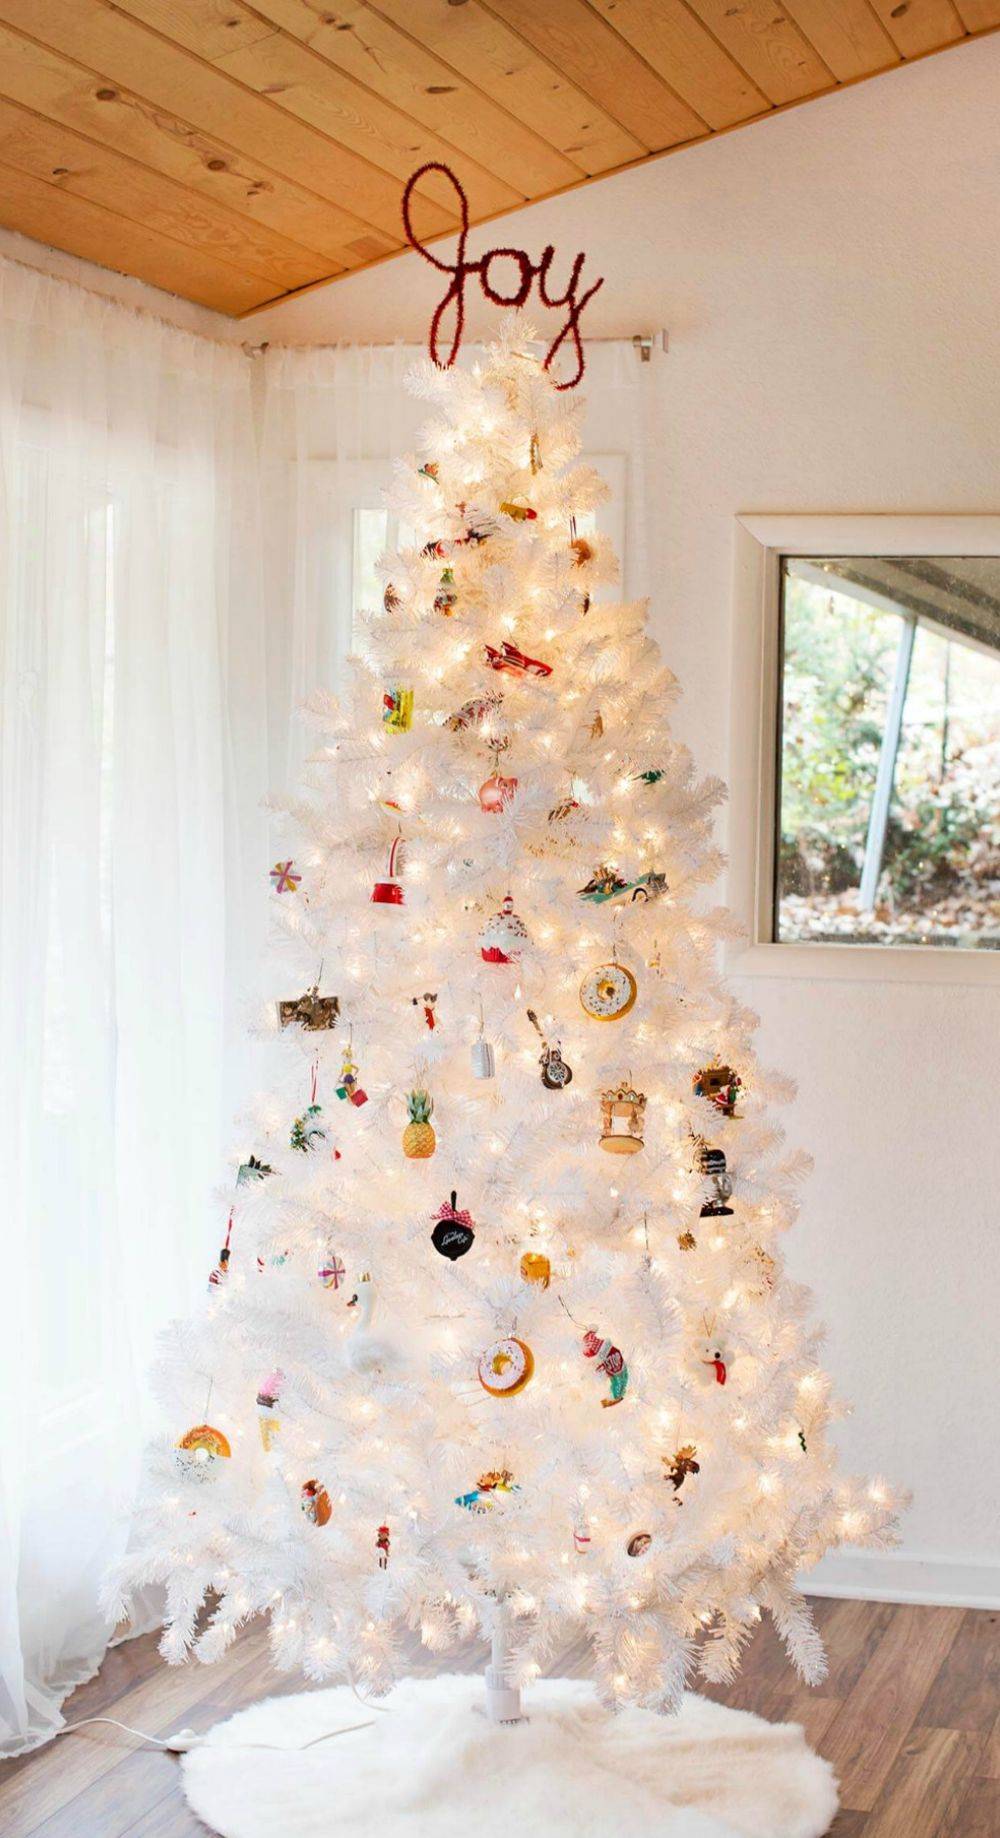 Easy-DIY-Christmas-Tree-Topper-that-spelss-out-JOY-77865